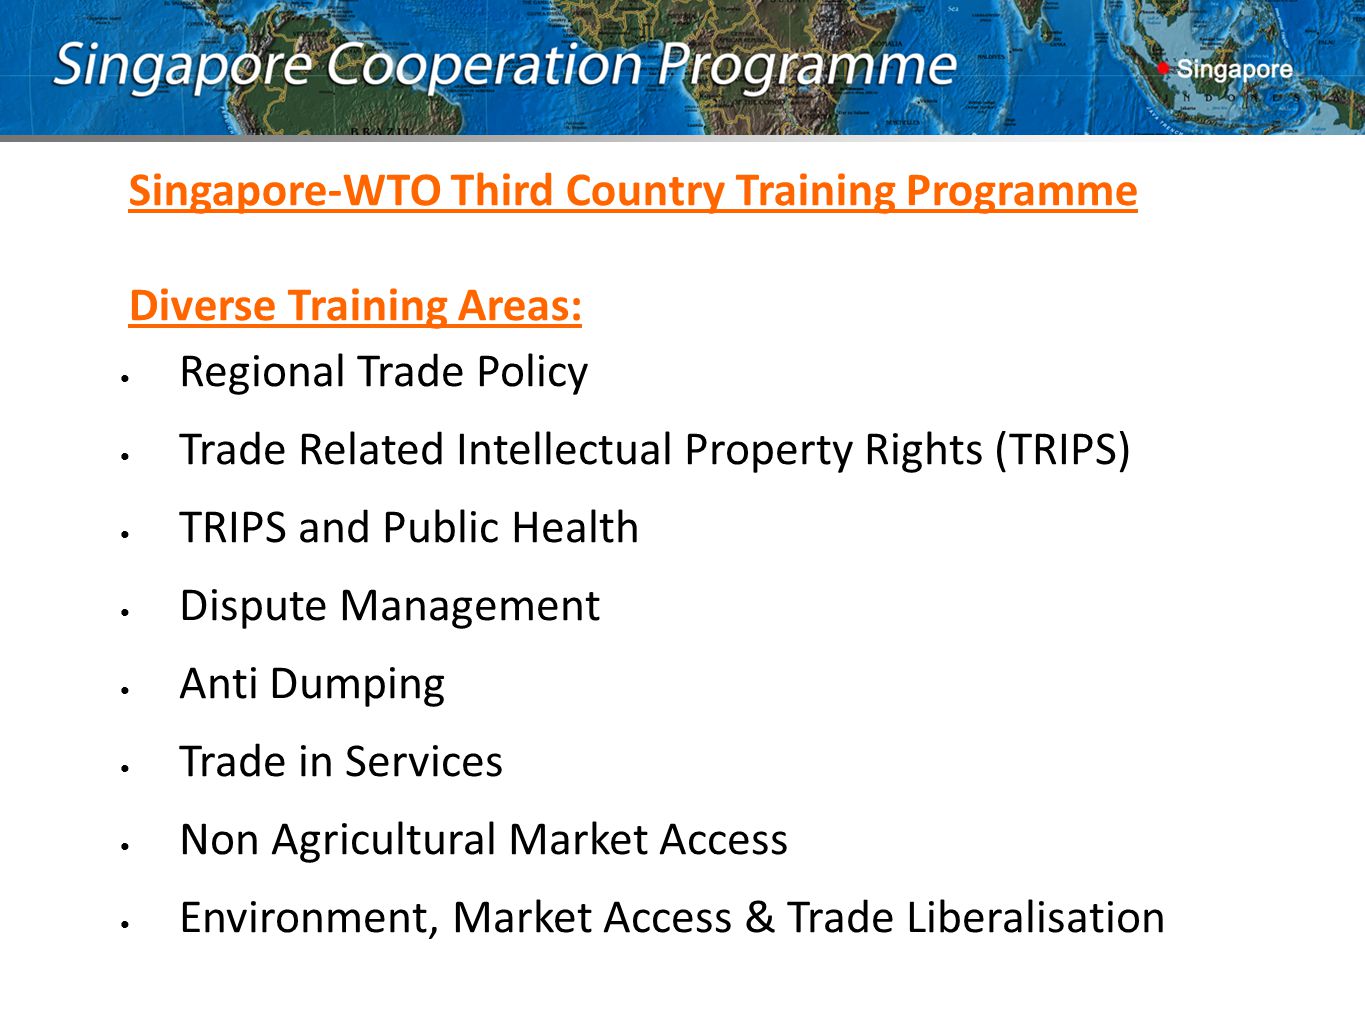 Singapore-WTO Third Country Training Programme Diverse Training Areas: Regional Trade Policy Trade Related Intellectual Property Rights (TRIPS) TRIPS and Public Health Dispute Management Anti Dumping Trade in Services Non Agricultural Market Access Environment, Market Access & Trade Liberalisation